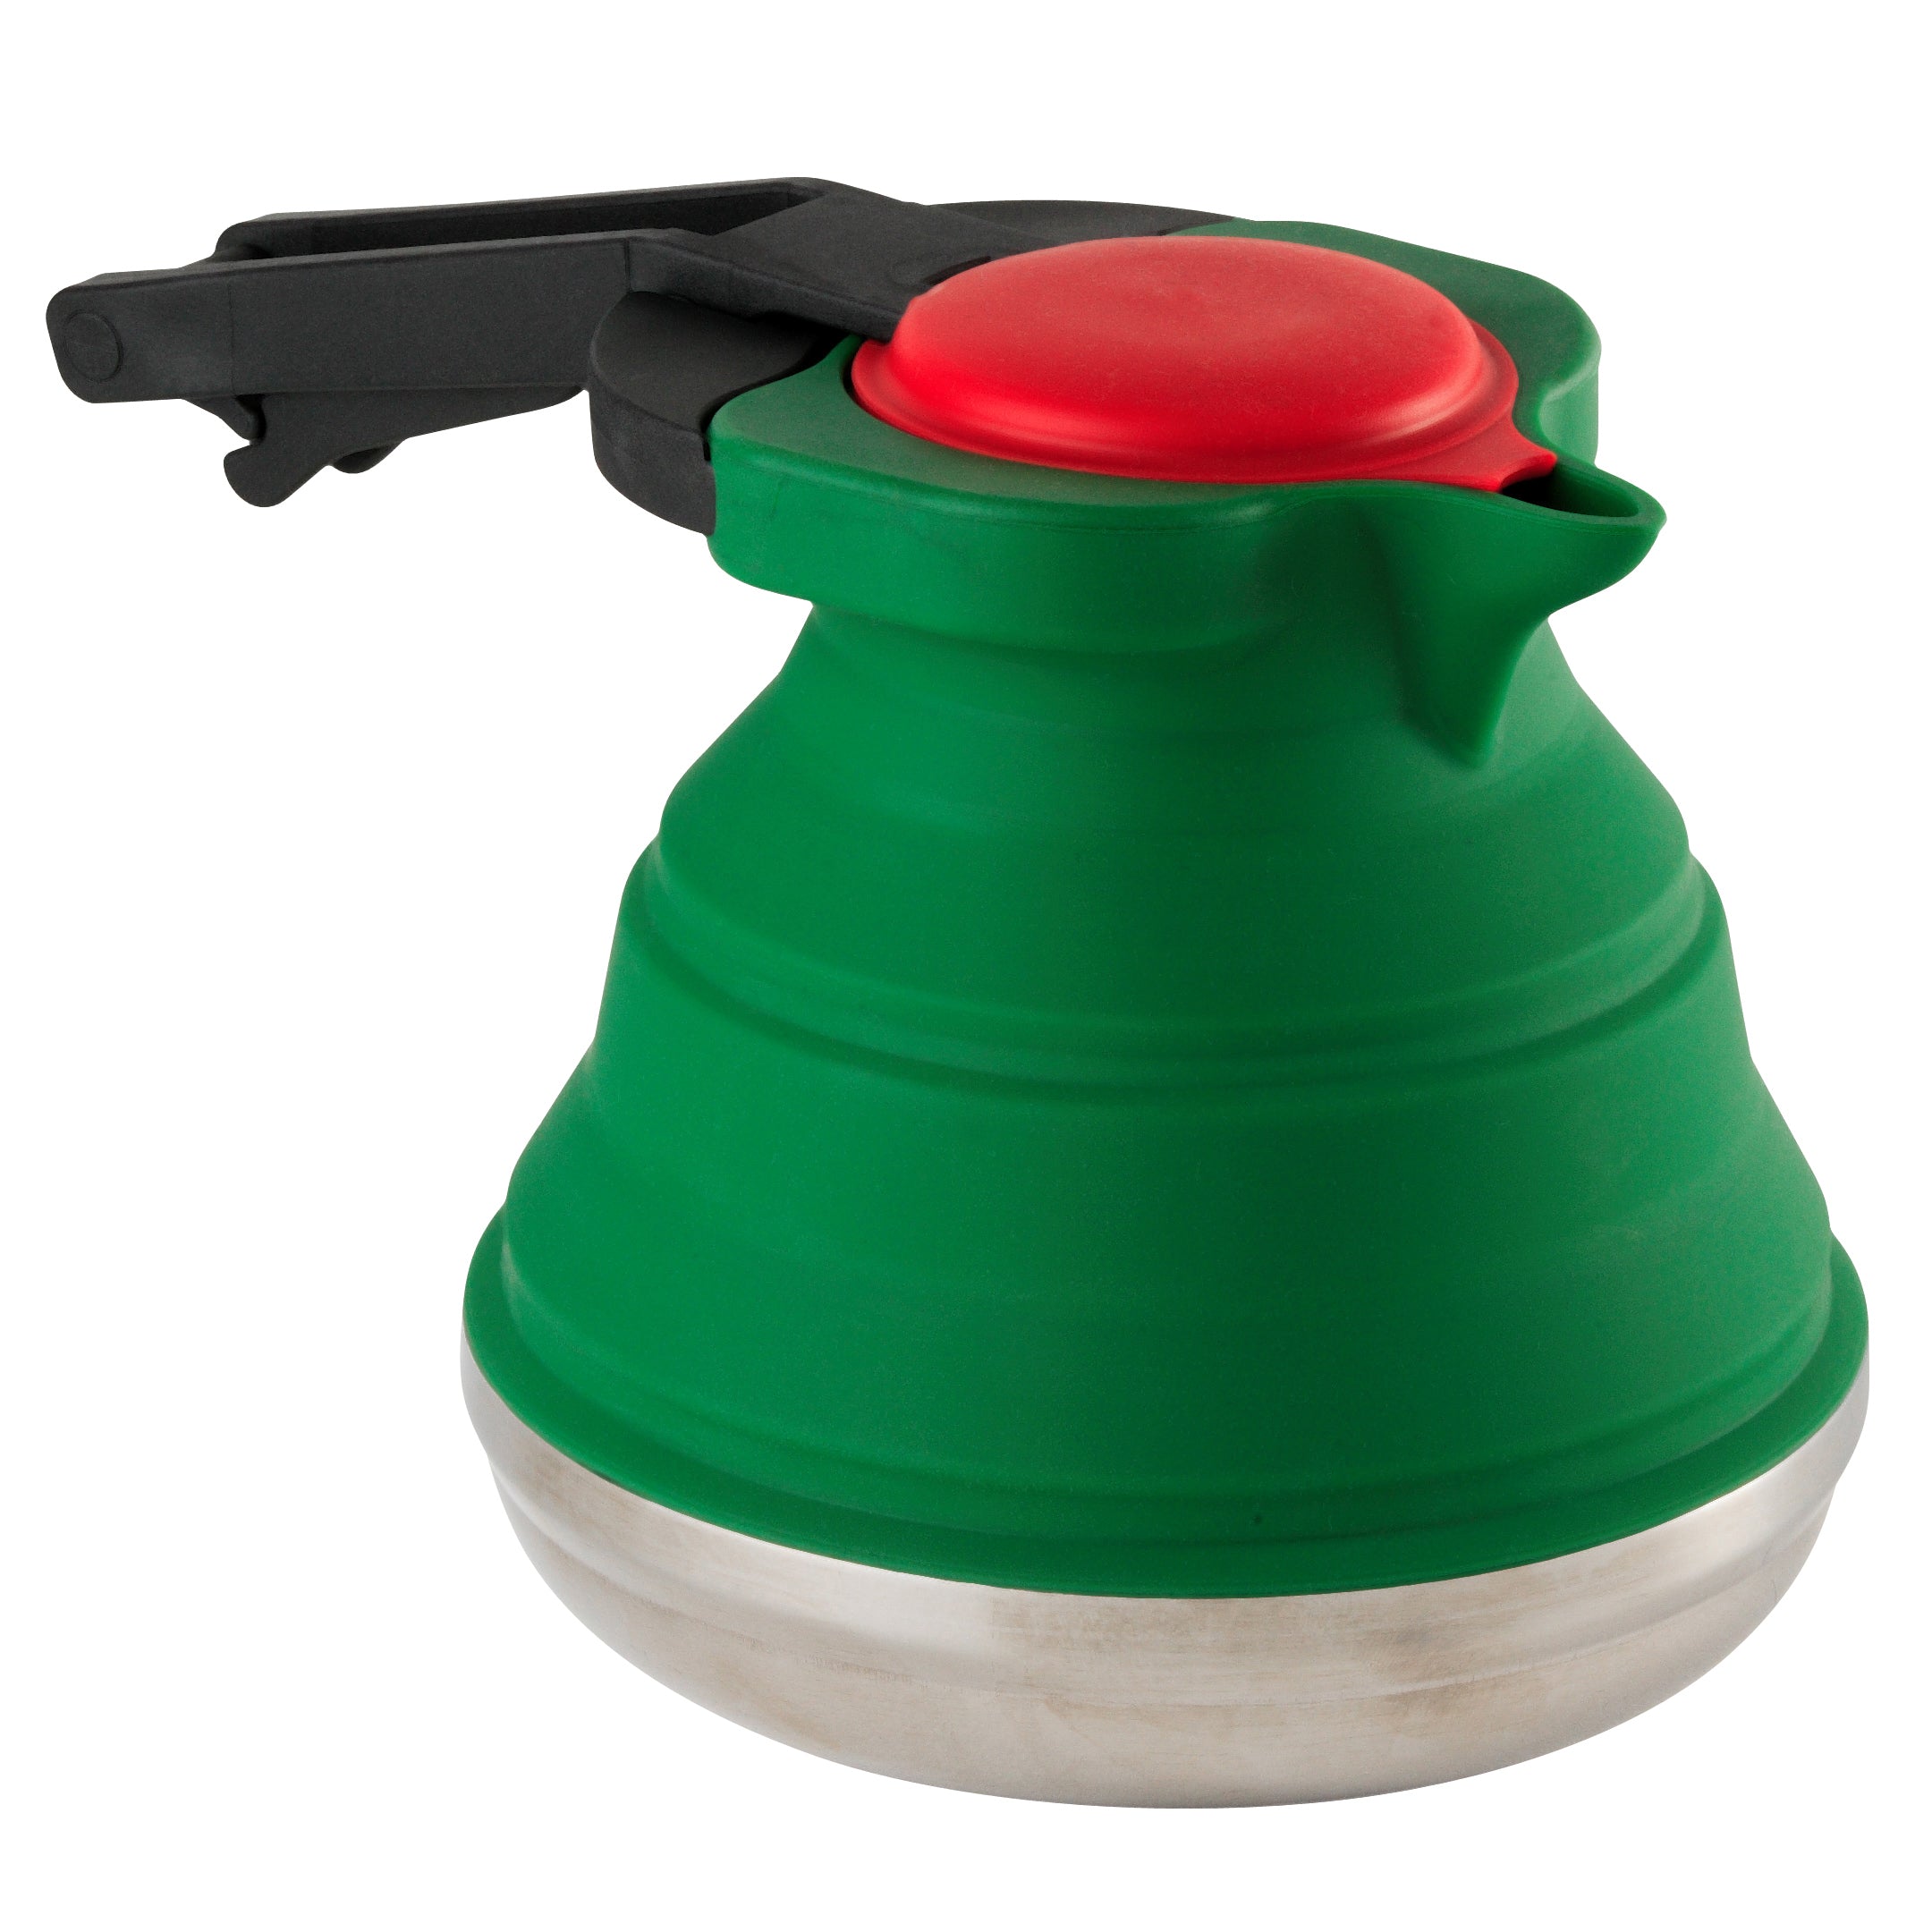 Collapsible Silicone Kettle - green